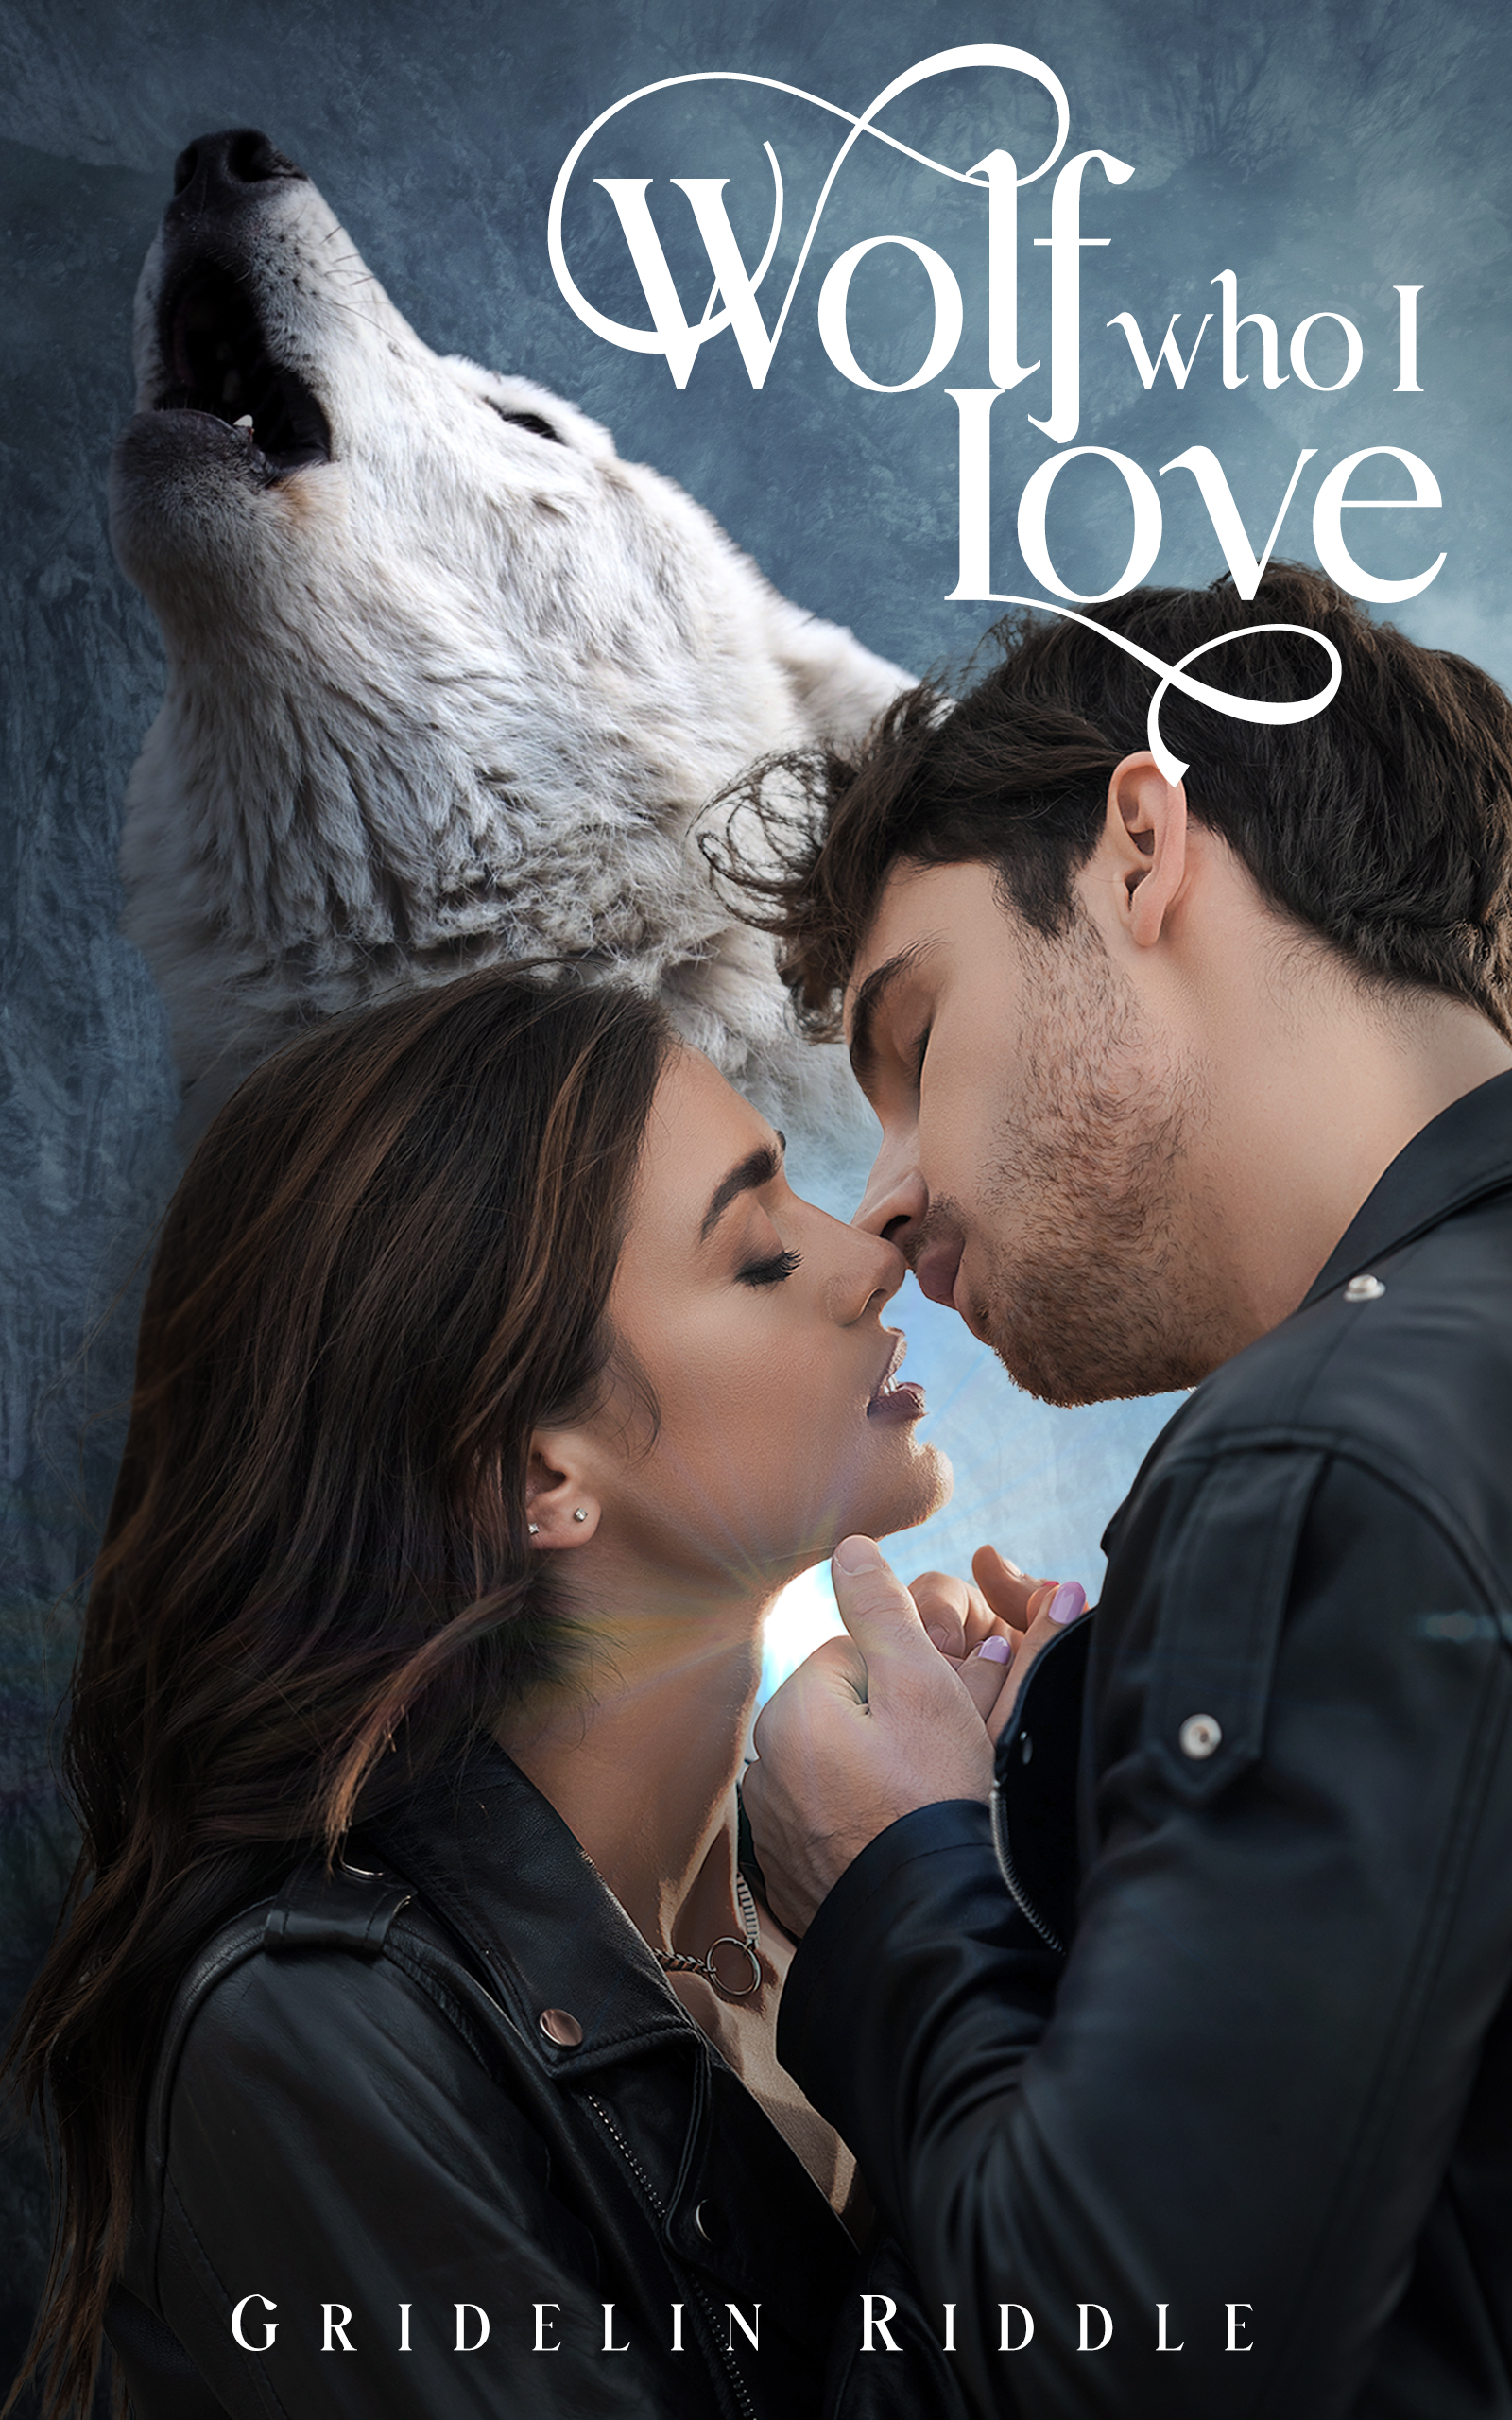 Wolf shifter couple kissing book cover.